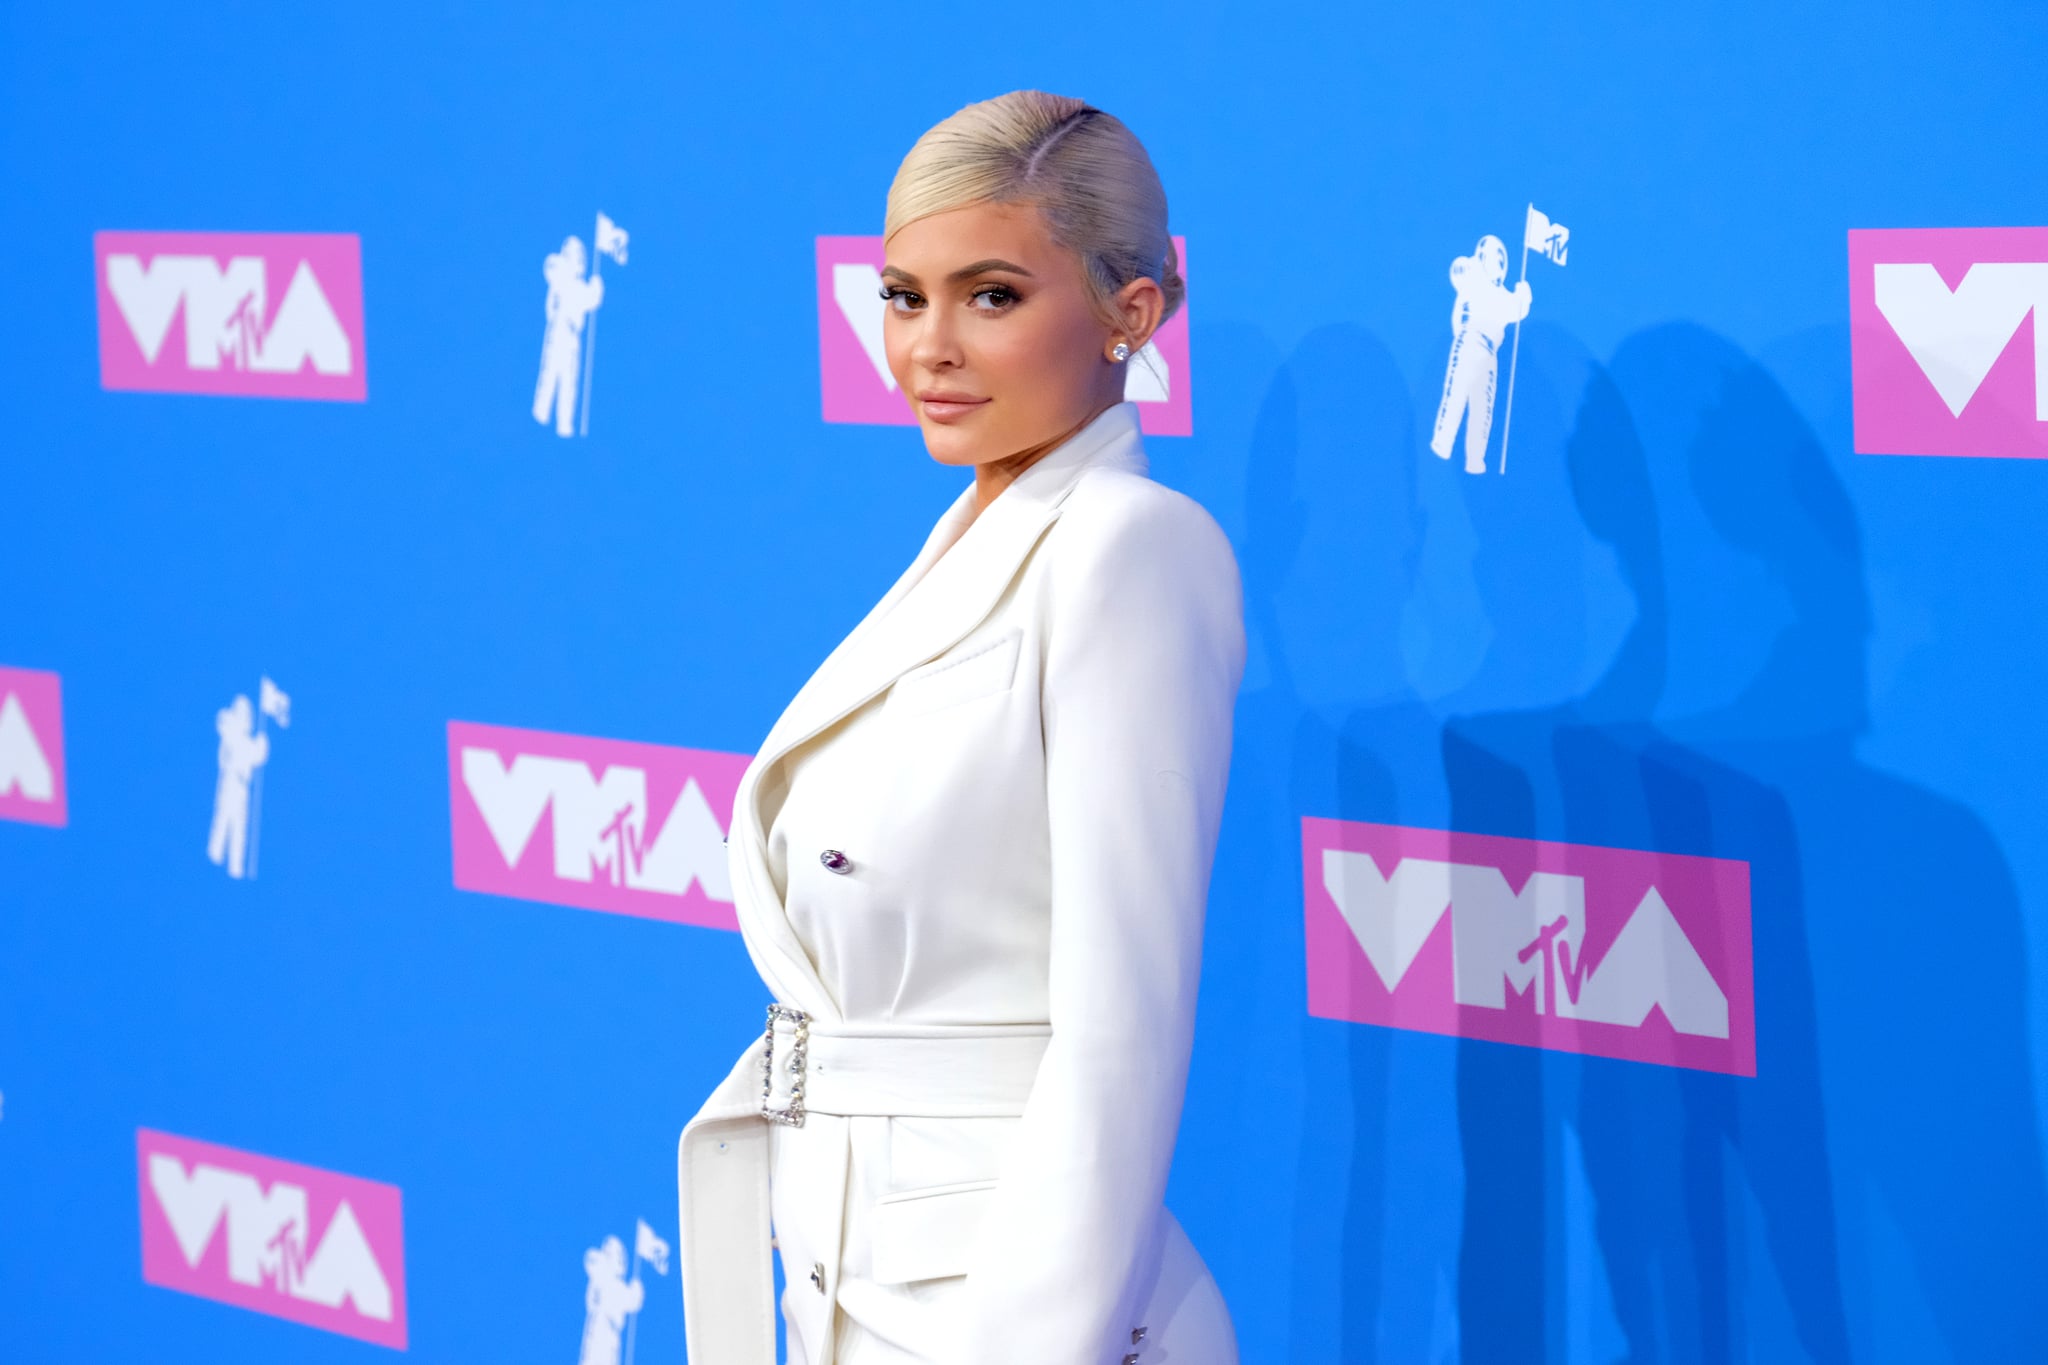 NEW YORK, NY - AUGUST 20:  Kylie Jenner attends the 2018 MTV Video Music Awards at Radio City Music Hall on August 20, 2018 in New York City.  (Photo by Matthew Eisman/FilmMagic)